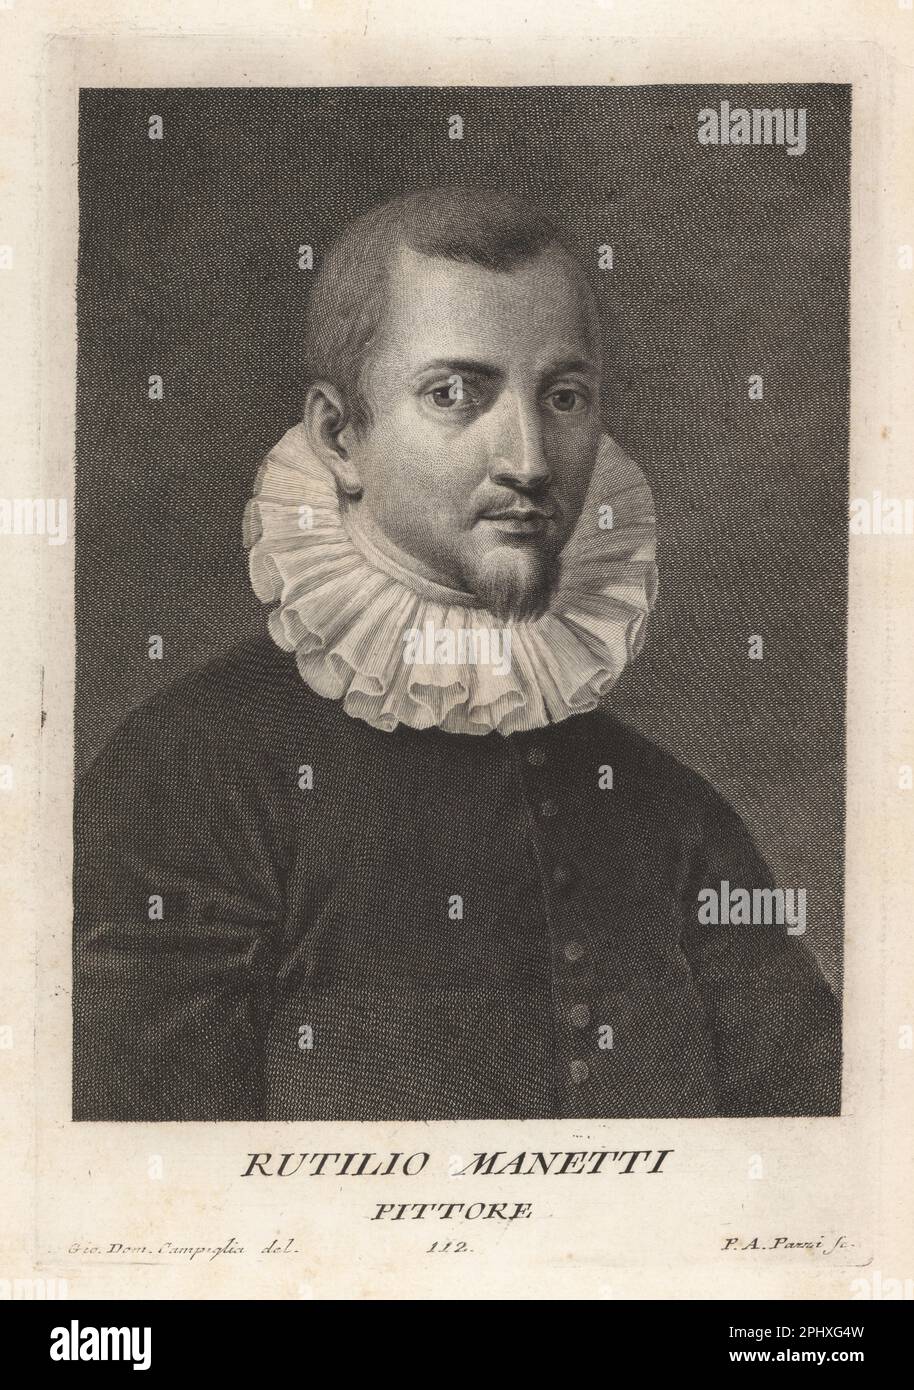 Rutilio di Lorenzo Manetti, Italian painter of late-Mannerism or proto-Baroque, 1571-1639. Worked mainly in Siena. Rutilio Manetti, Pittore. Copperplate engraving by Pietro Antonio Pazzi after Giovanni Domenico Campiglia after a self portrait by the artist from Francesco Moucke's Museo Florentino (Museum Florentinum), Serie di Ritratti de Pittori (Series of Portraits of Painters) stamperia Mouckiana, Florence, 1752-62. Stock Photo